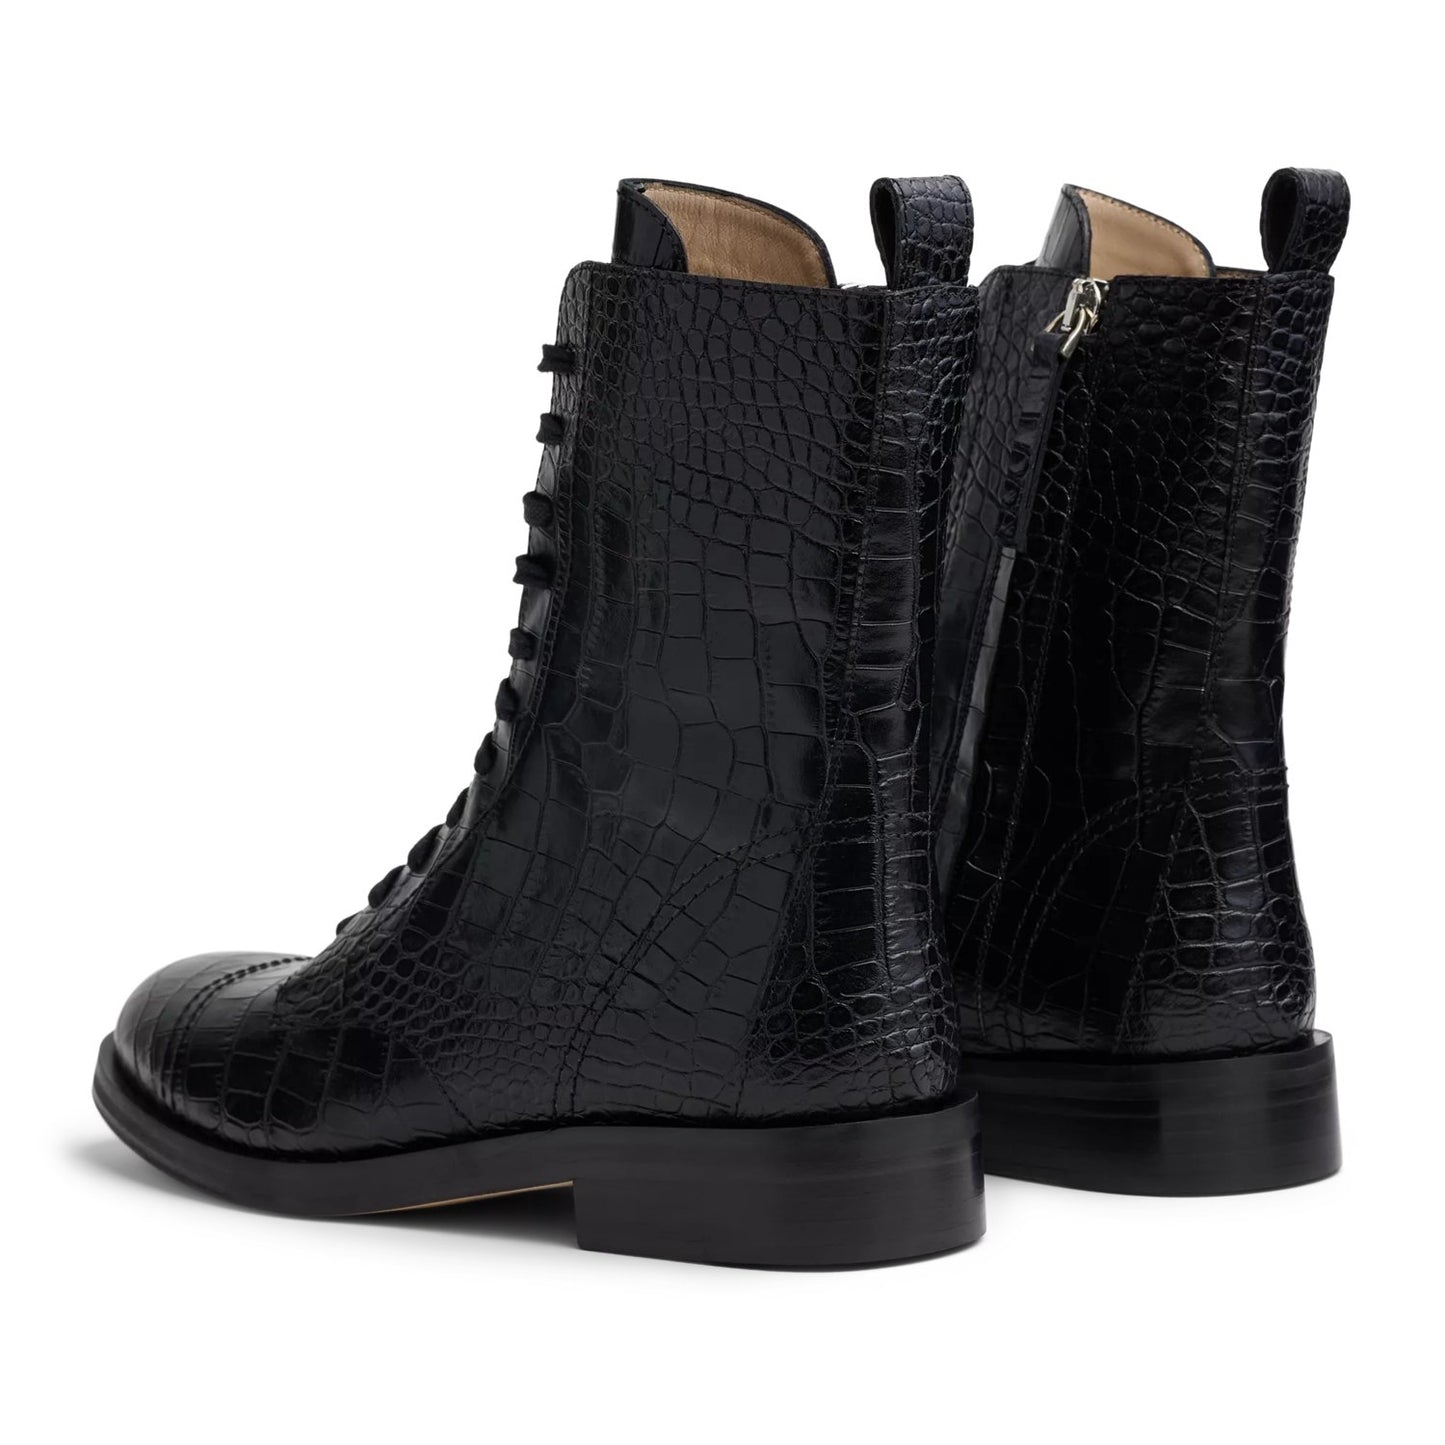 Crocodile-Embossed Leather Captain Lace-Up Boots